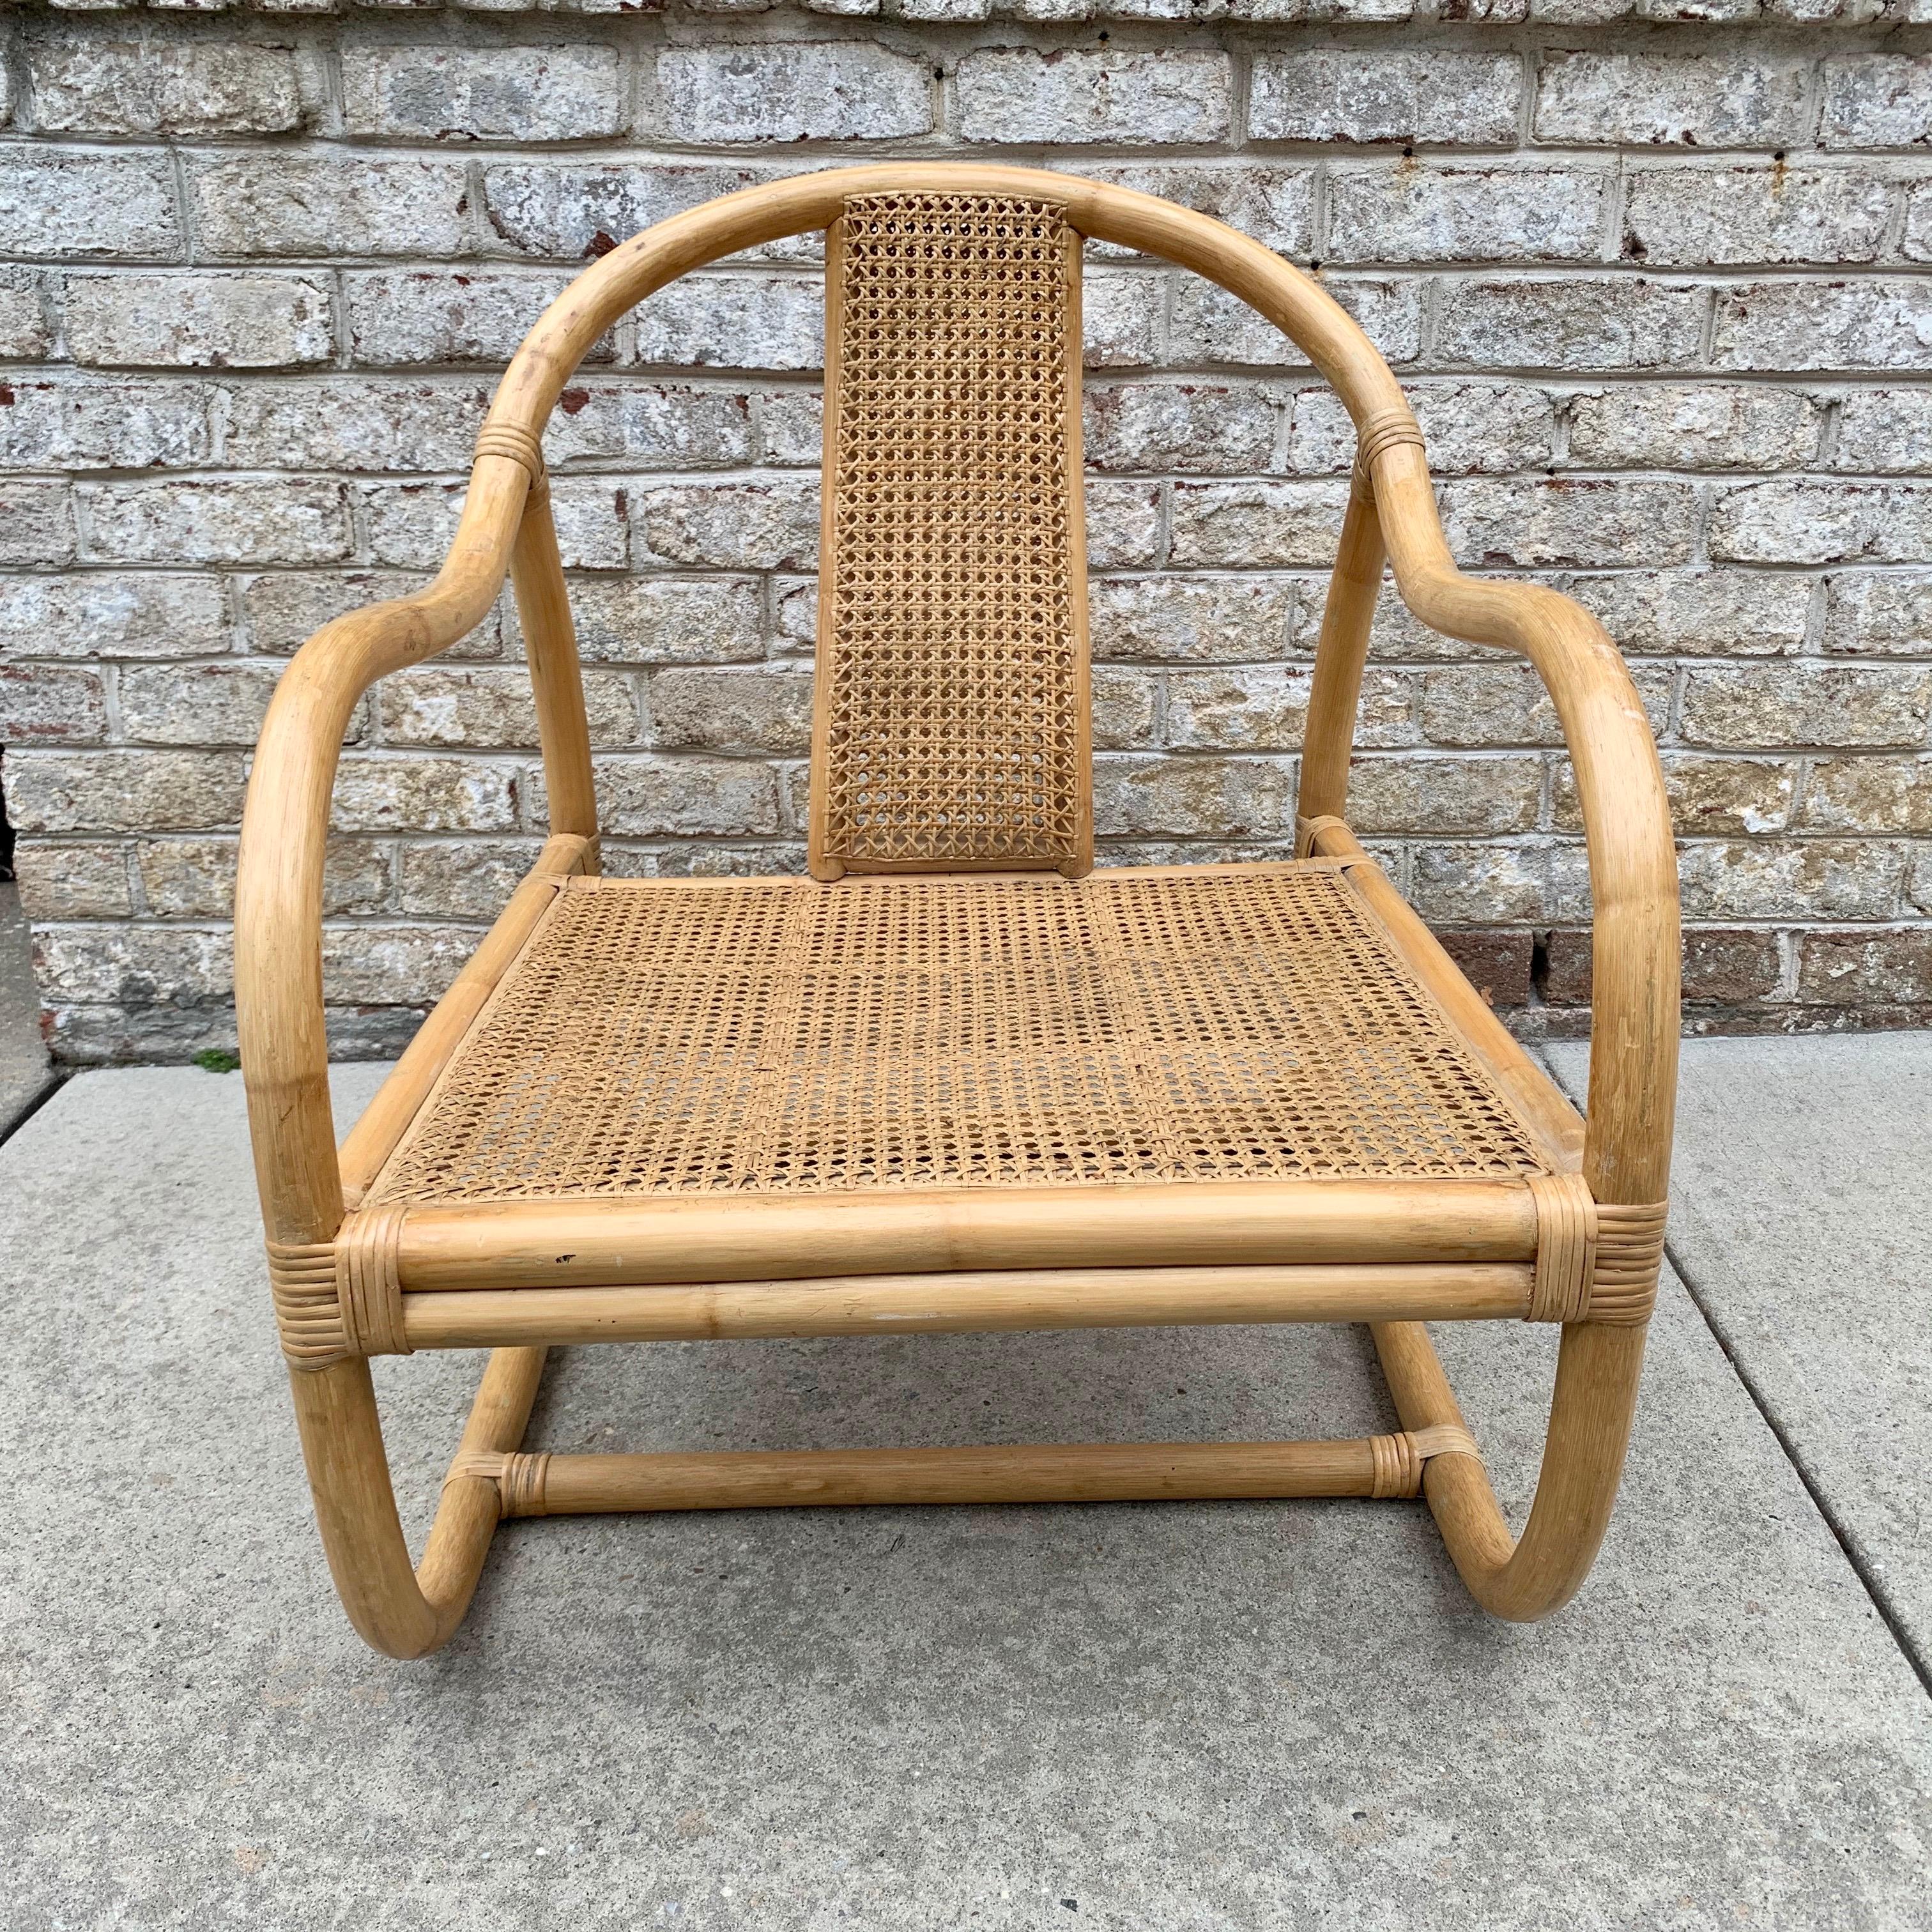 A single masterpiece. This well crafted single bamboo chair with an Asian flair, will complete perfectly your project,
Woven wicker seat and back is in tact and no damage. A couple of scuffs here and there to bamboo legs and arms from normal wear